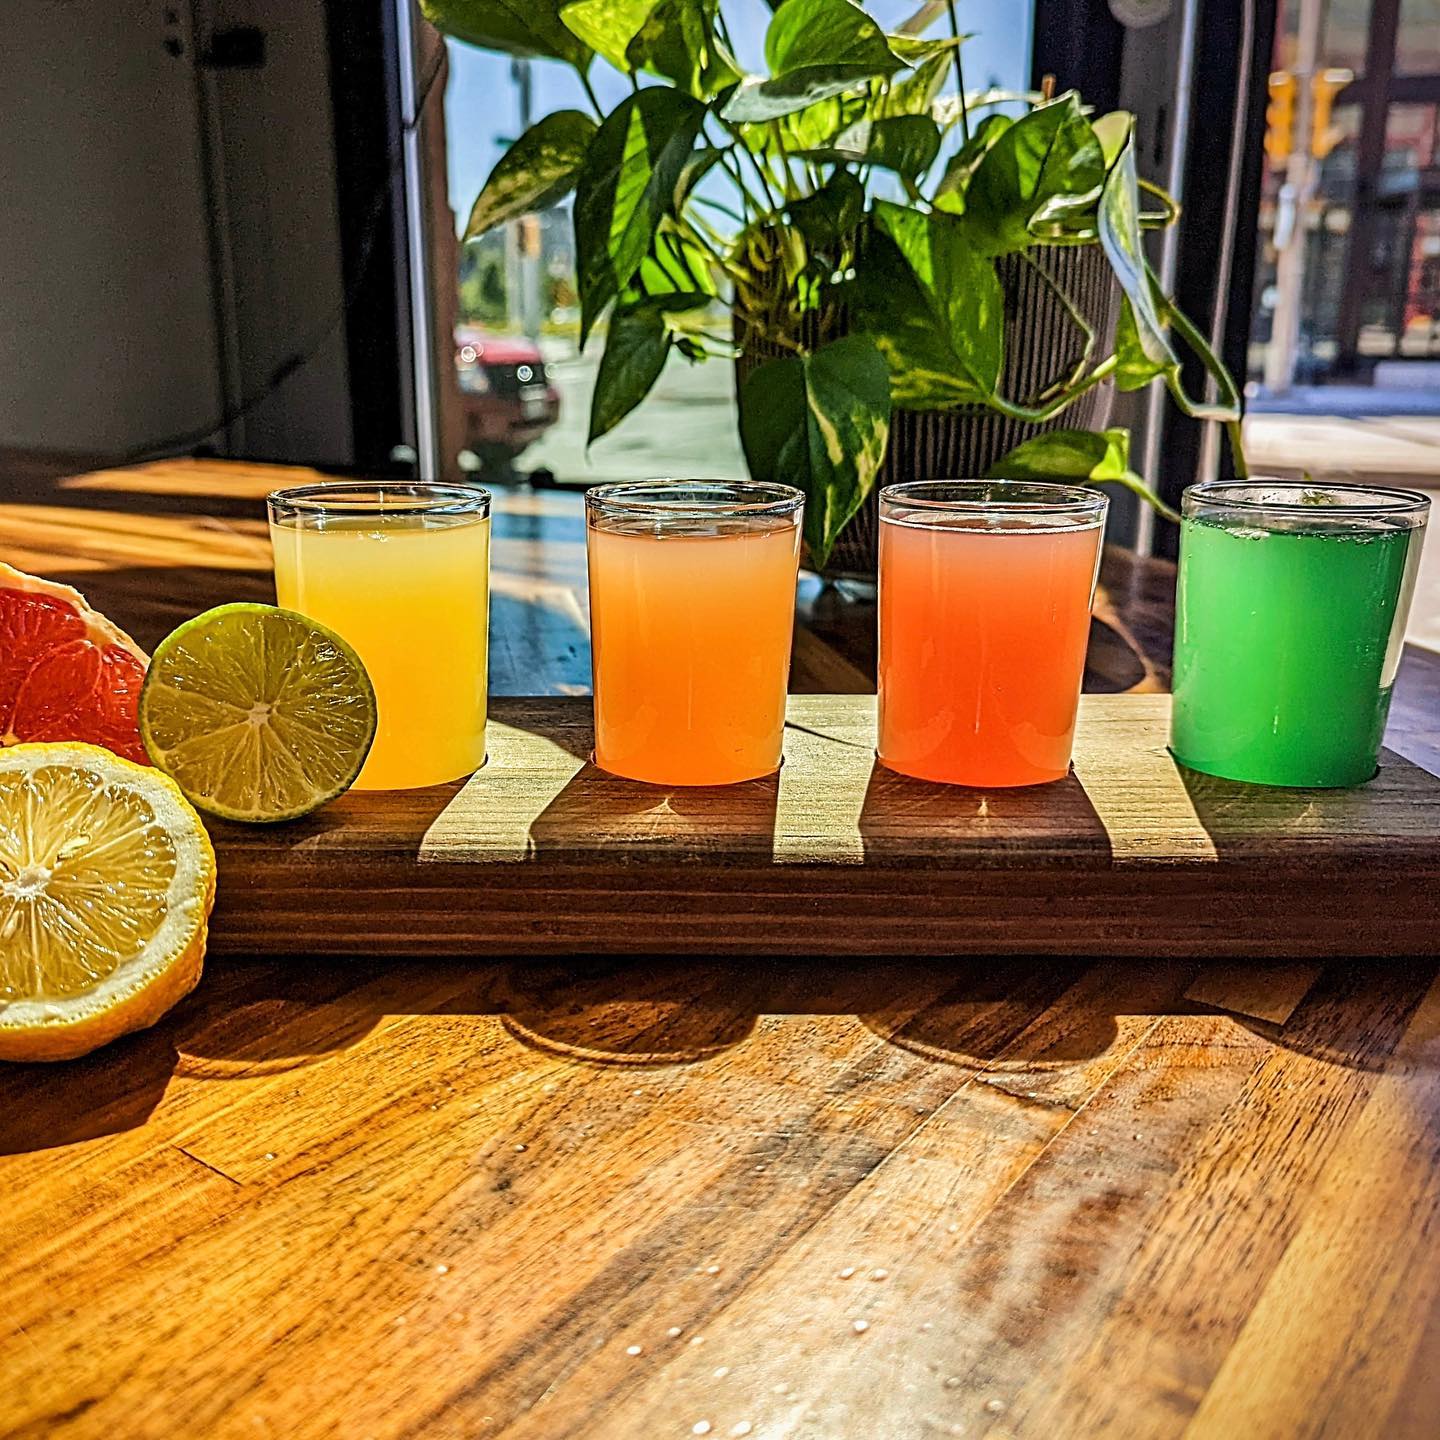 Stop by the taproom tomorrow from 1-6 for a Really RAD Sunday!🤙🏼 Come try a flight of 4 unique Radler creations and vote on your favorite. The winning Radler will be added to our menu for the month of July! 🍋🍊

...okay, but what's a Radler? In short, a Radler is 3 parts beer, 1 part soda and 1 part juice. If you're looking for the perfect summer beverage, this is definitely it.☀️